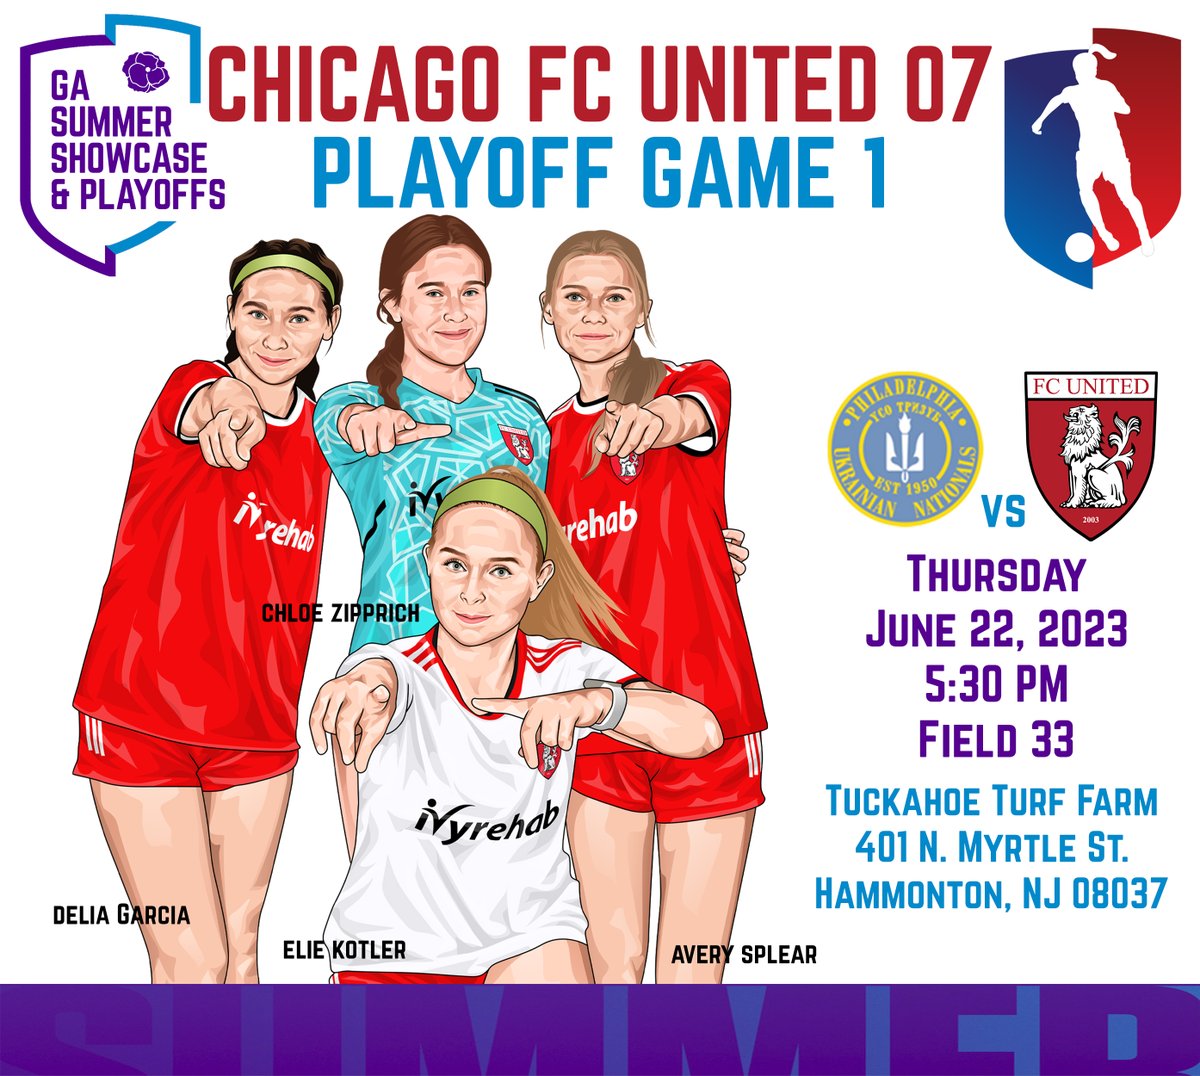 Come see @ChicagoFCUnited take on an amazing @ukrainian2007GA team in a Champions Cup rematch on June 22, 2023 at @TuckahoeTurf Field 33 at 5:30pm. @PrepSoccer @TheSoccerWire @TopPreps @TopDrawerSoccer @scoutingzone @ImYouthSoccer